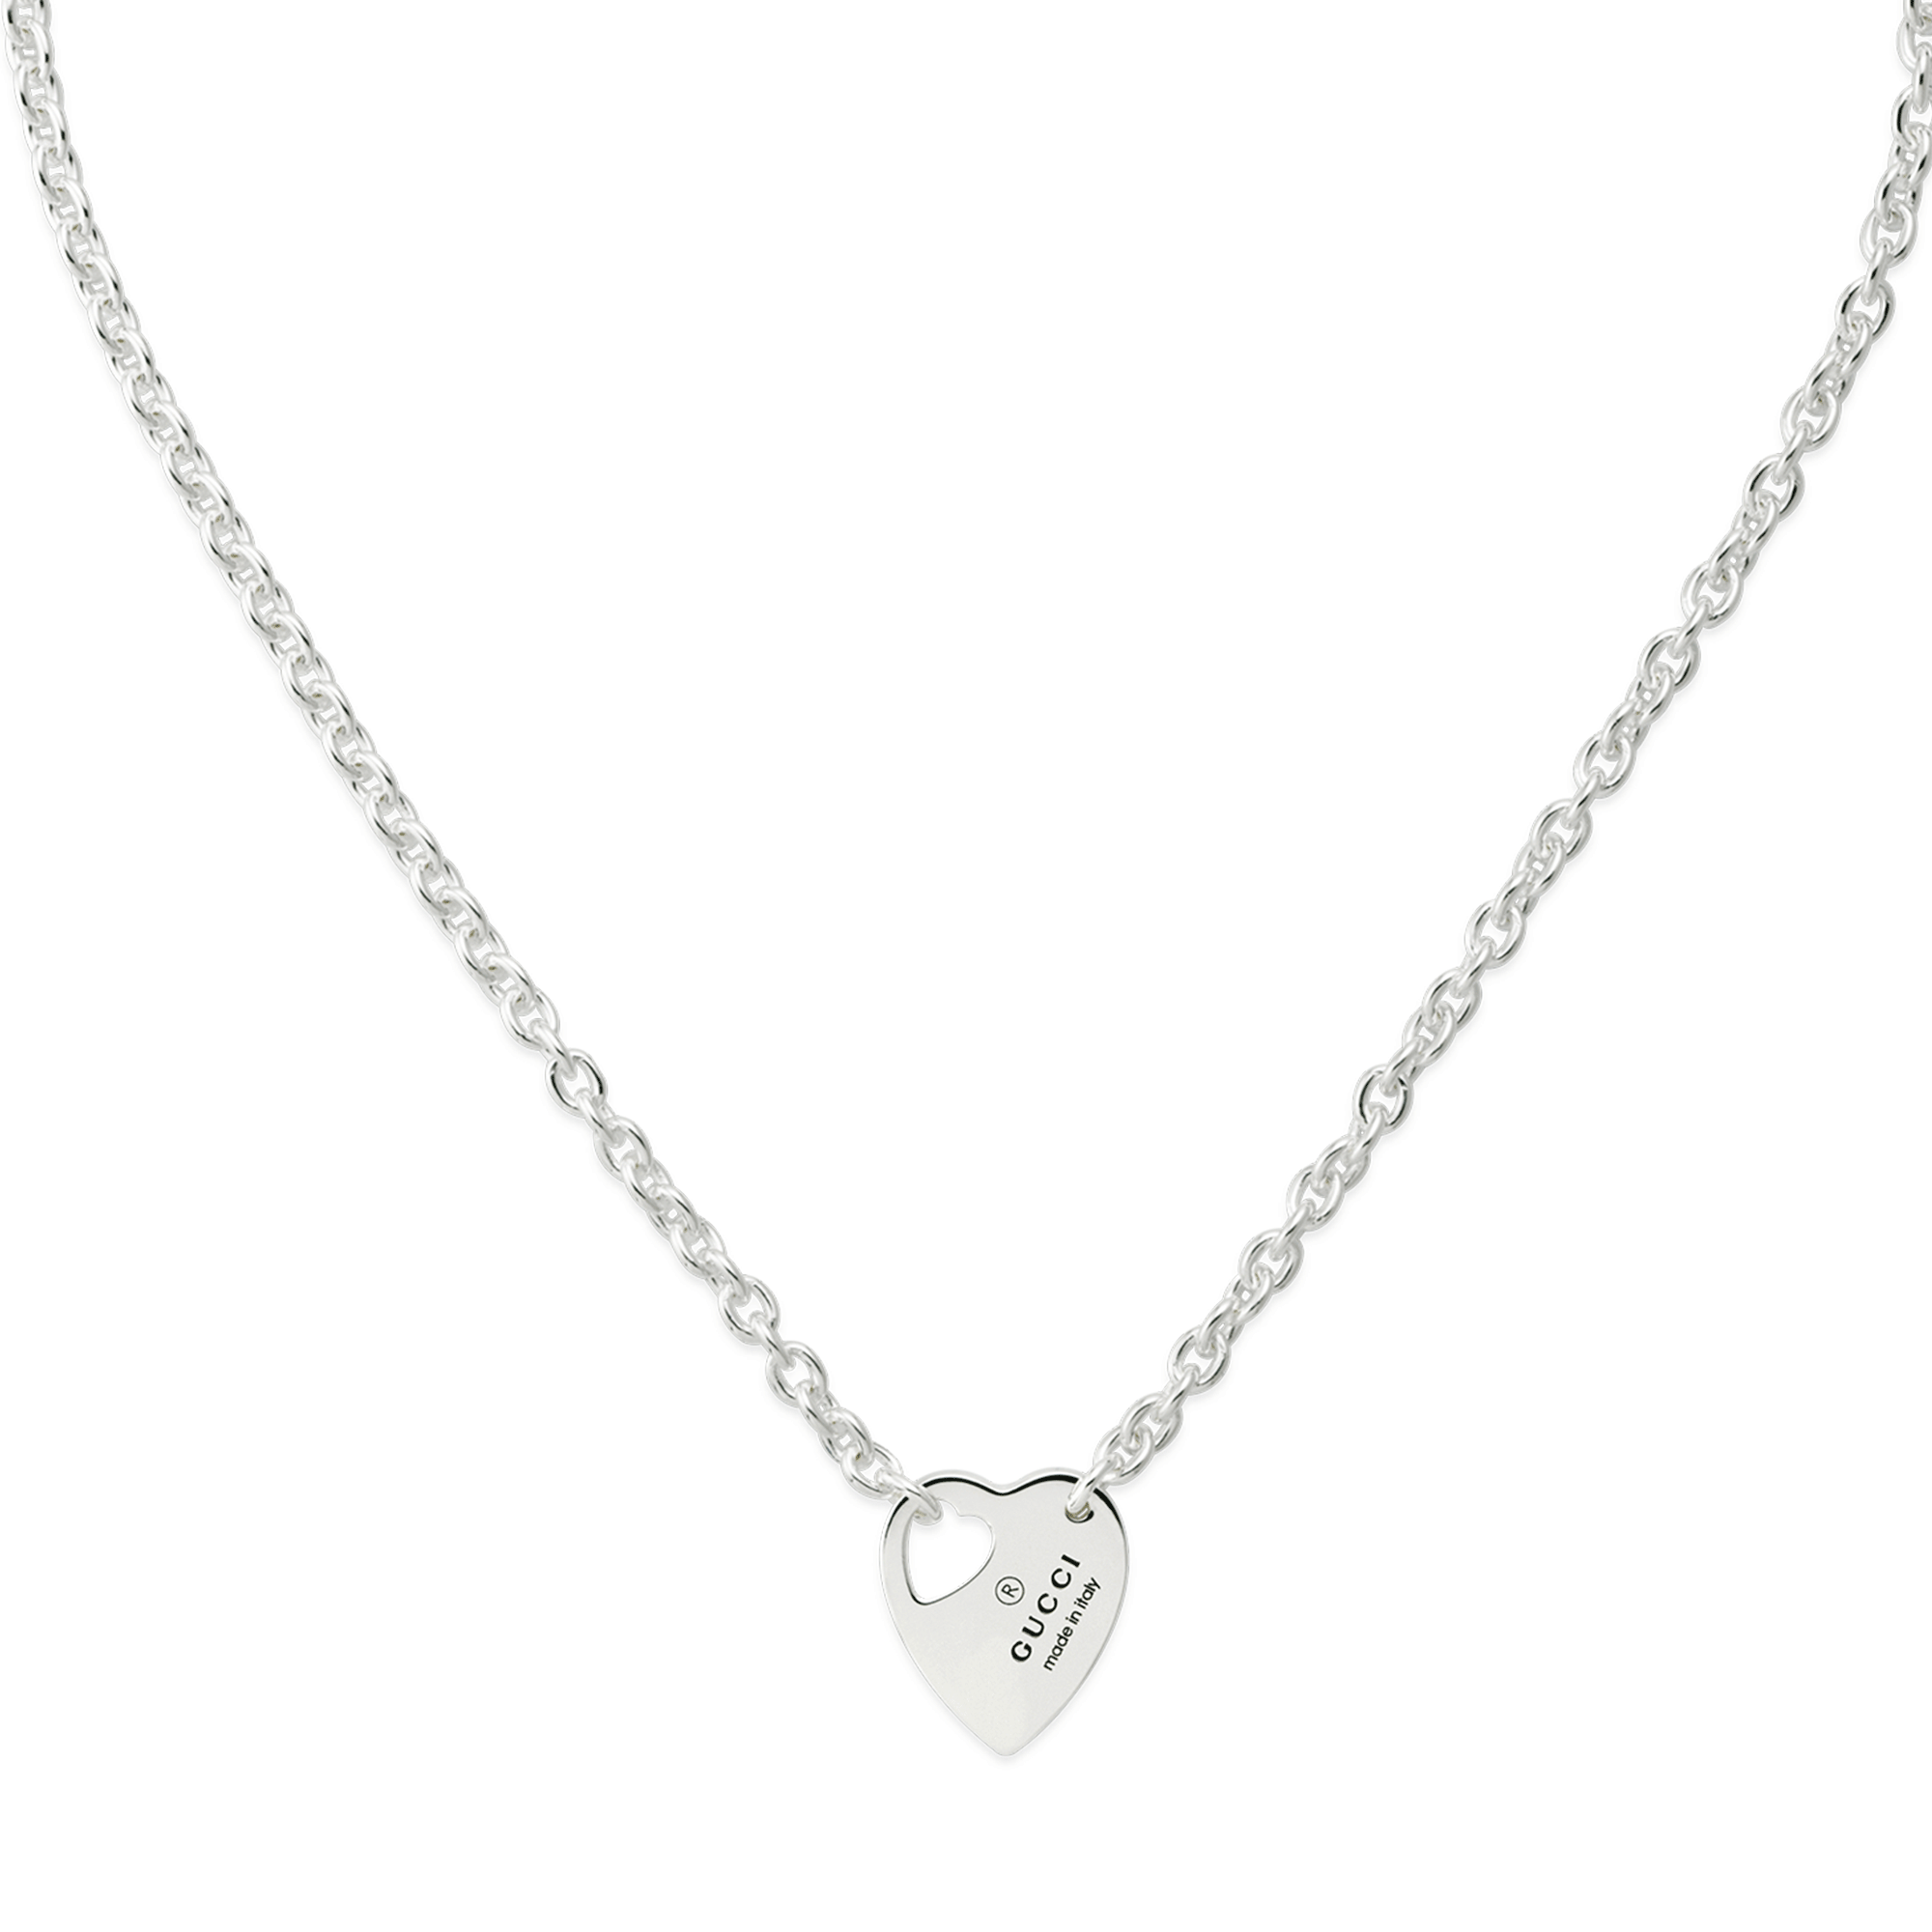 Trademark Sterling Silver Heart Necklace